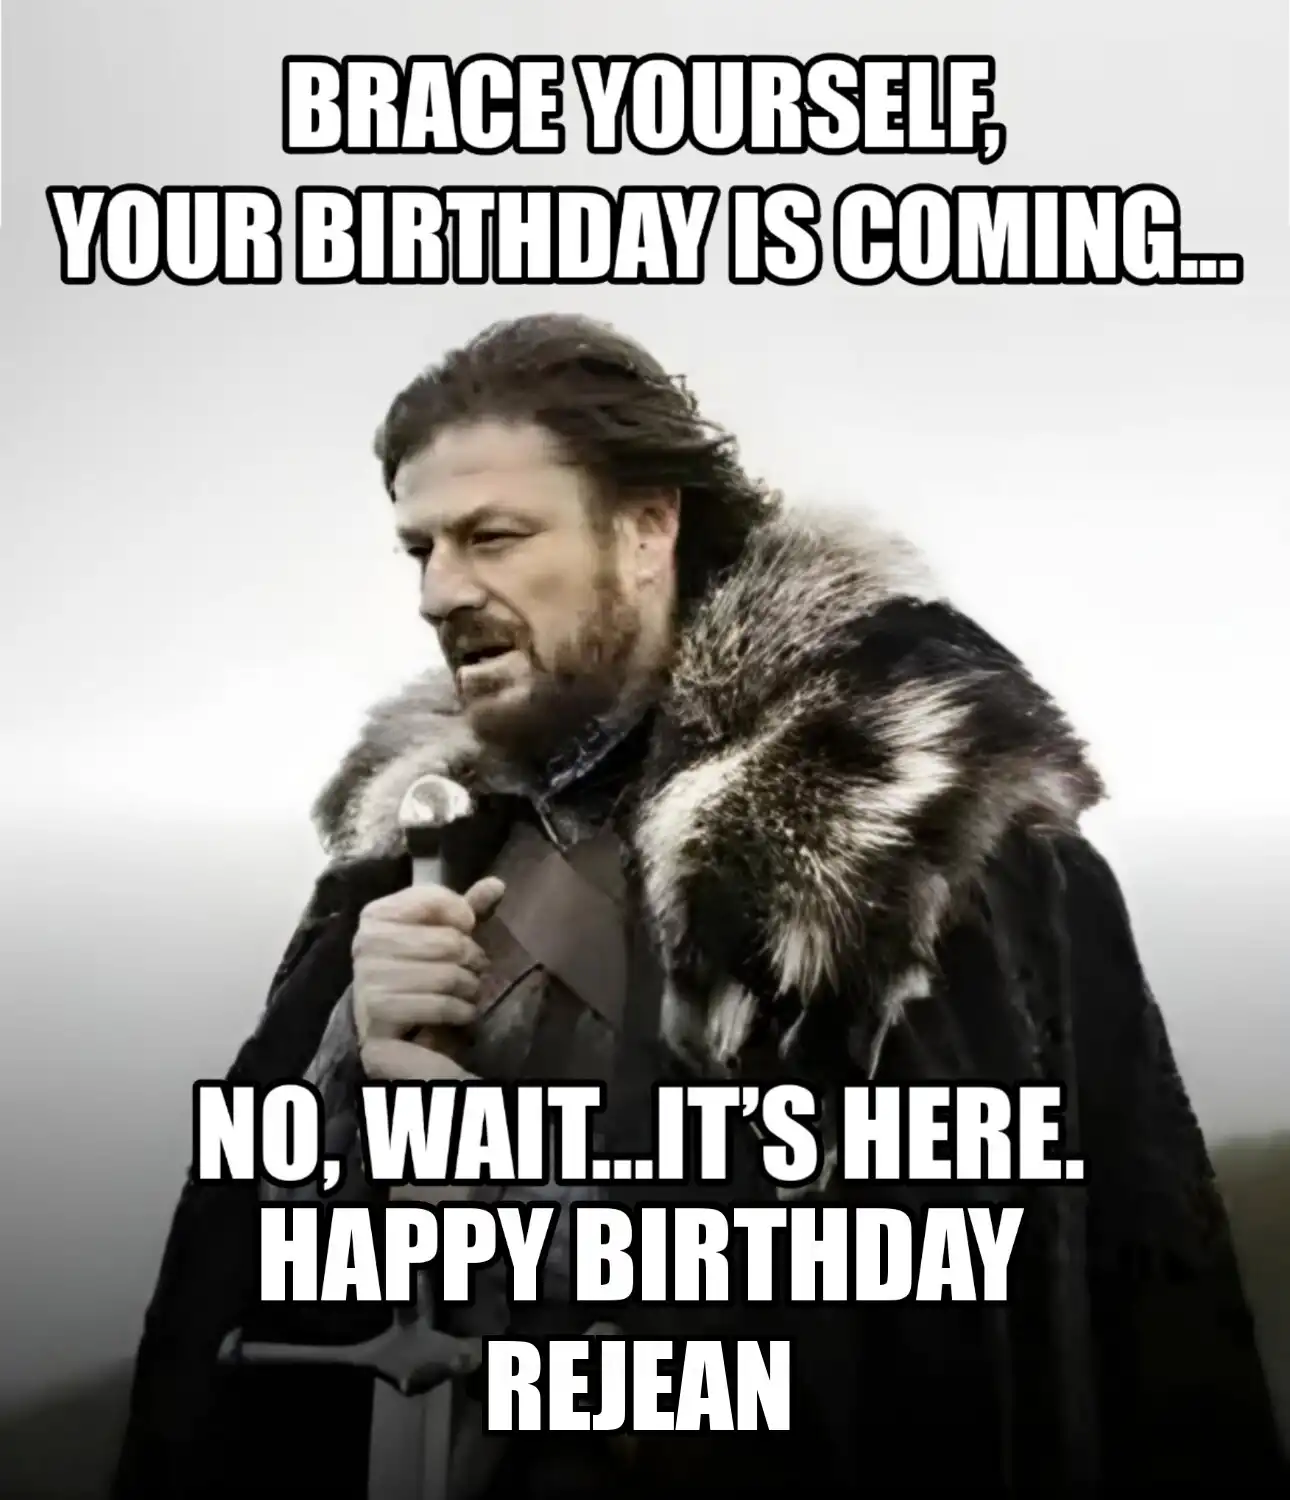 Happy Birthday Rejean Brace Yourself Your Birthday Is Coming Meme